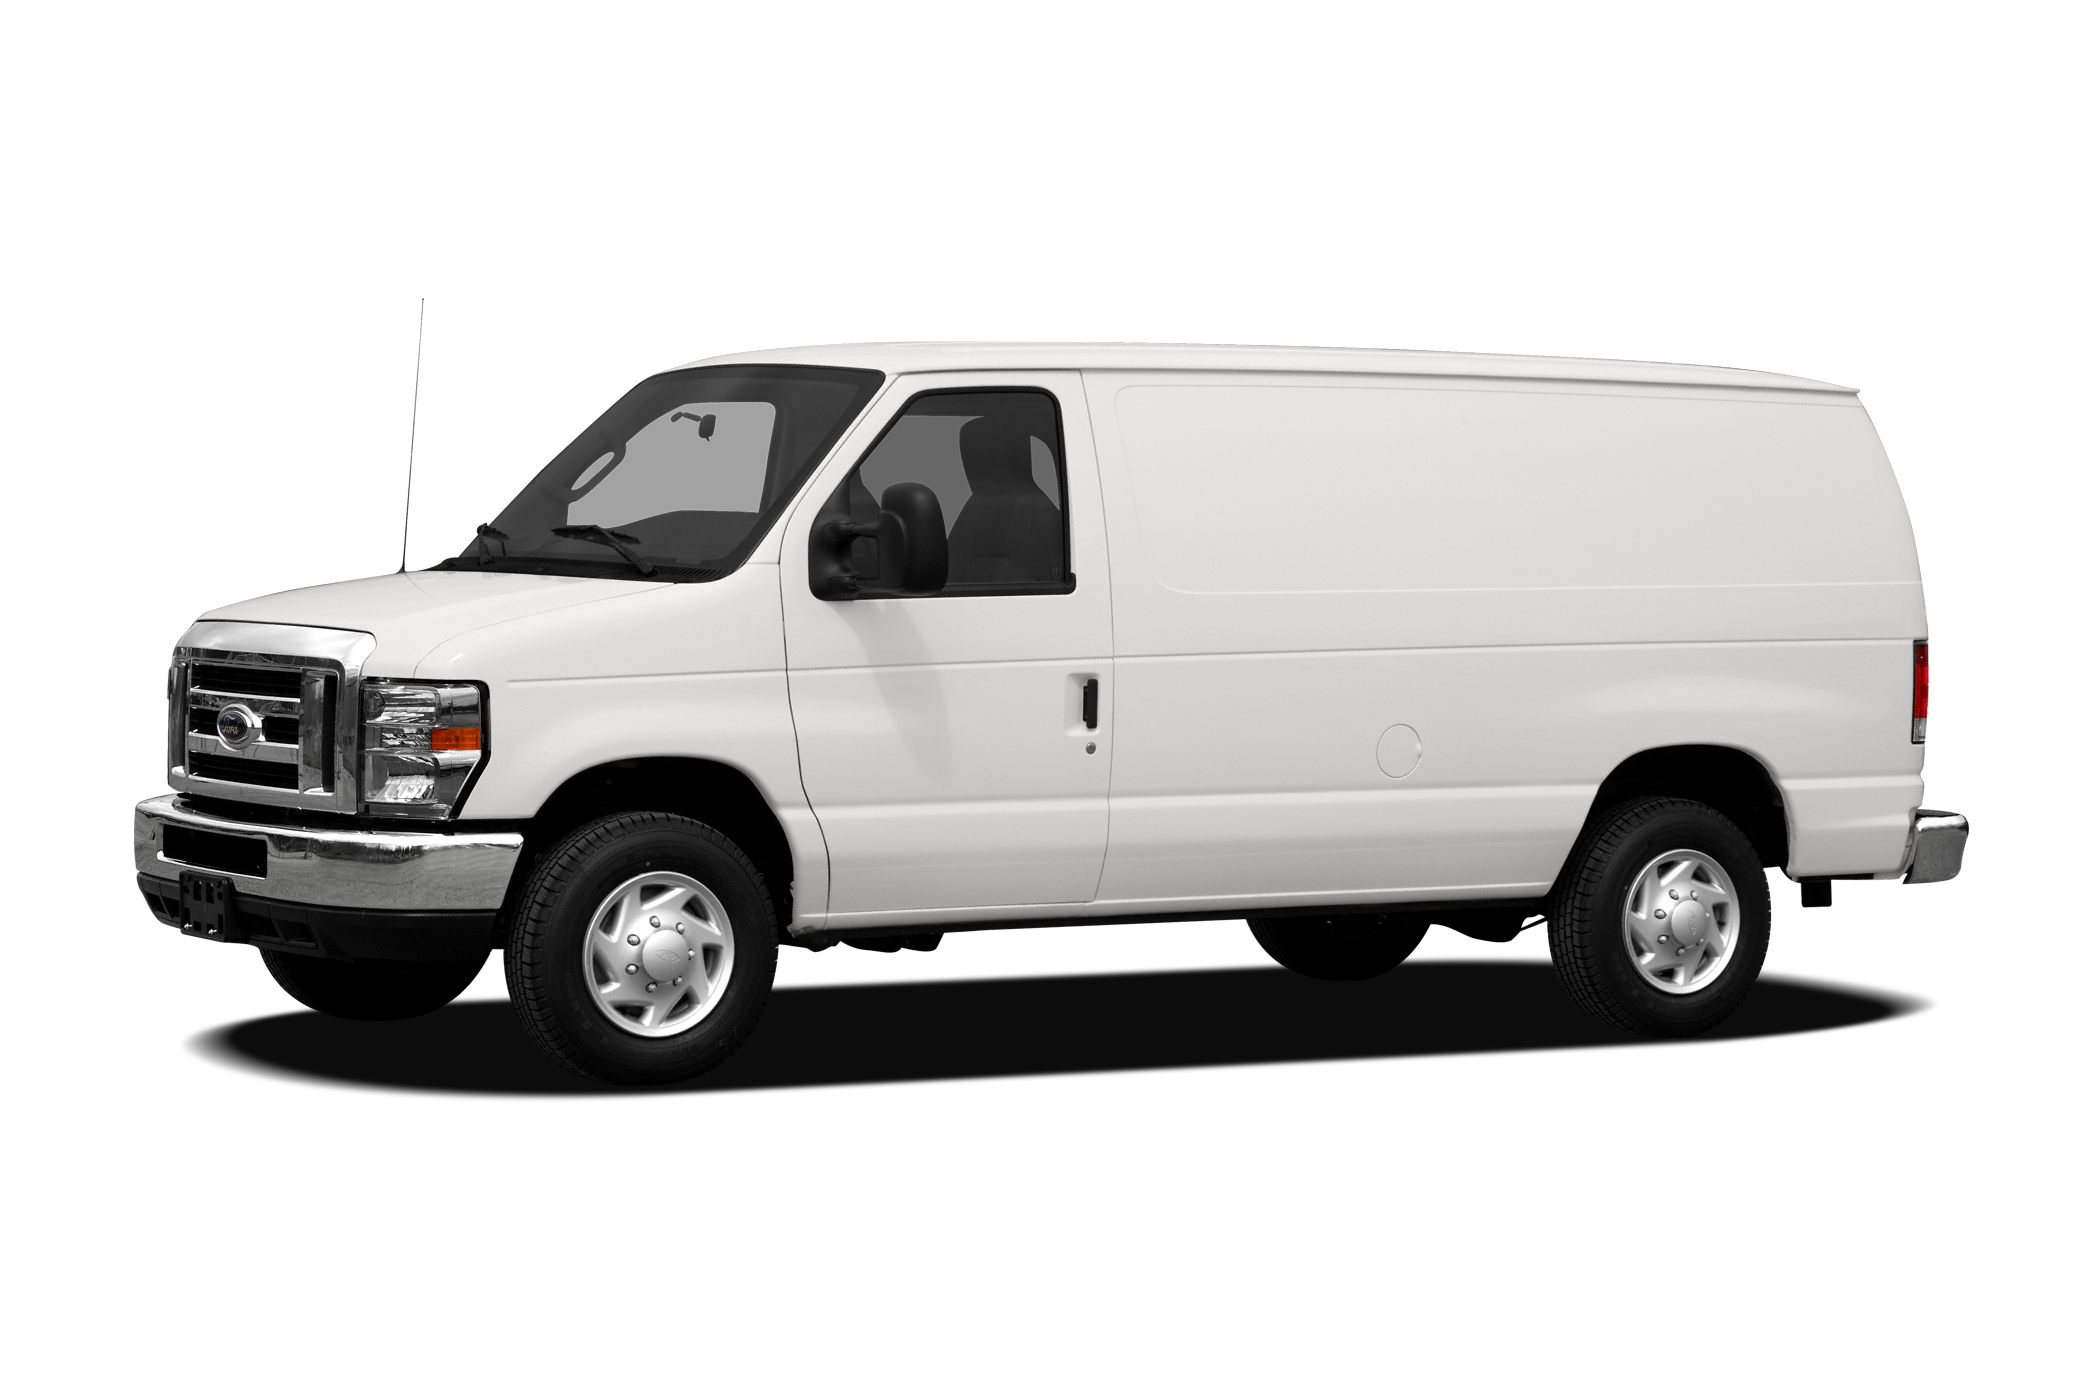 09 Ford E 350 Super Duty Commercial Cargo Van Pictures